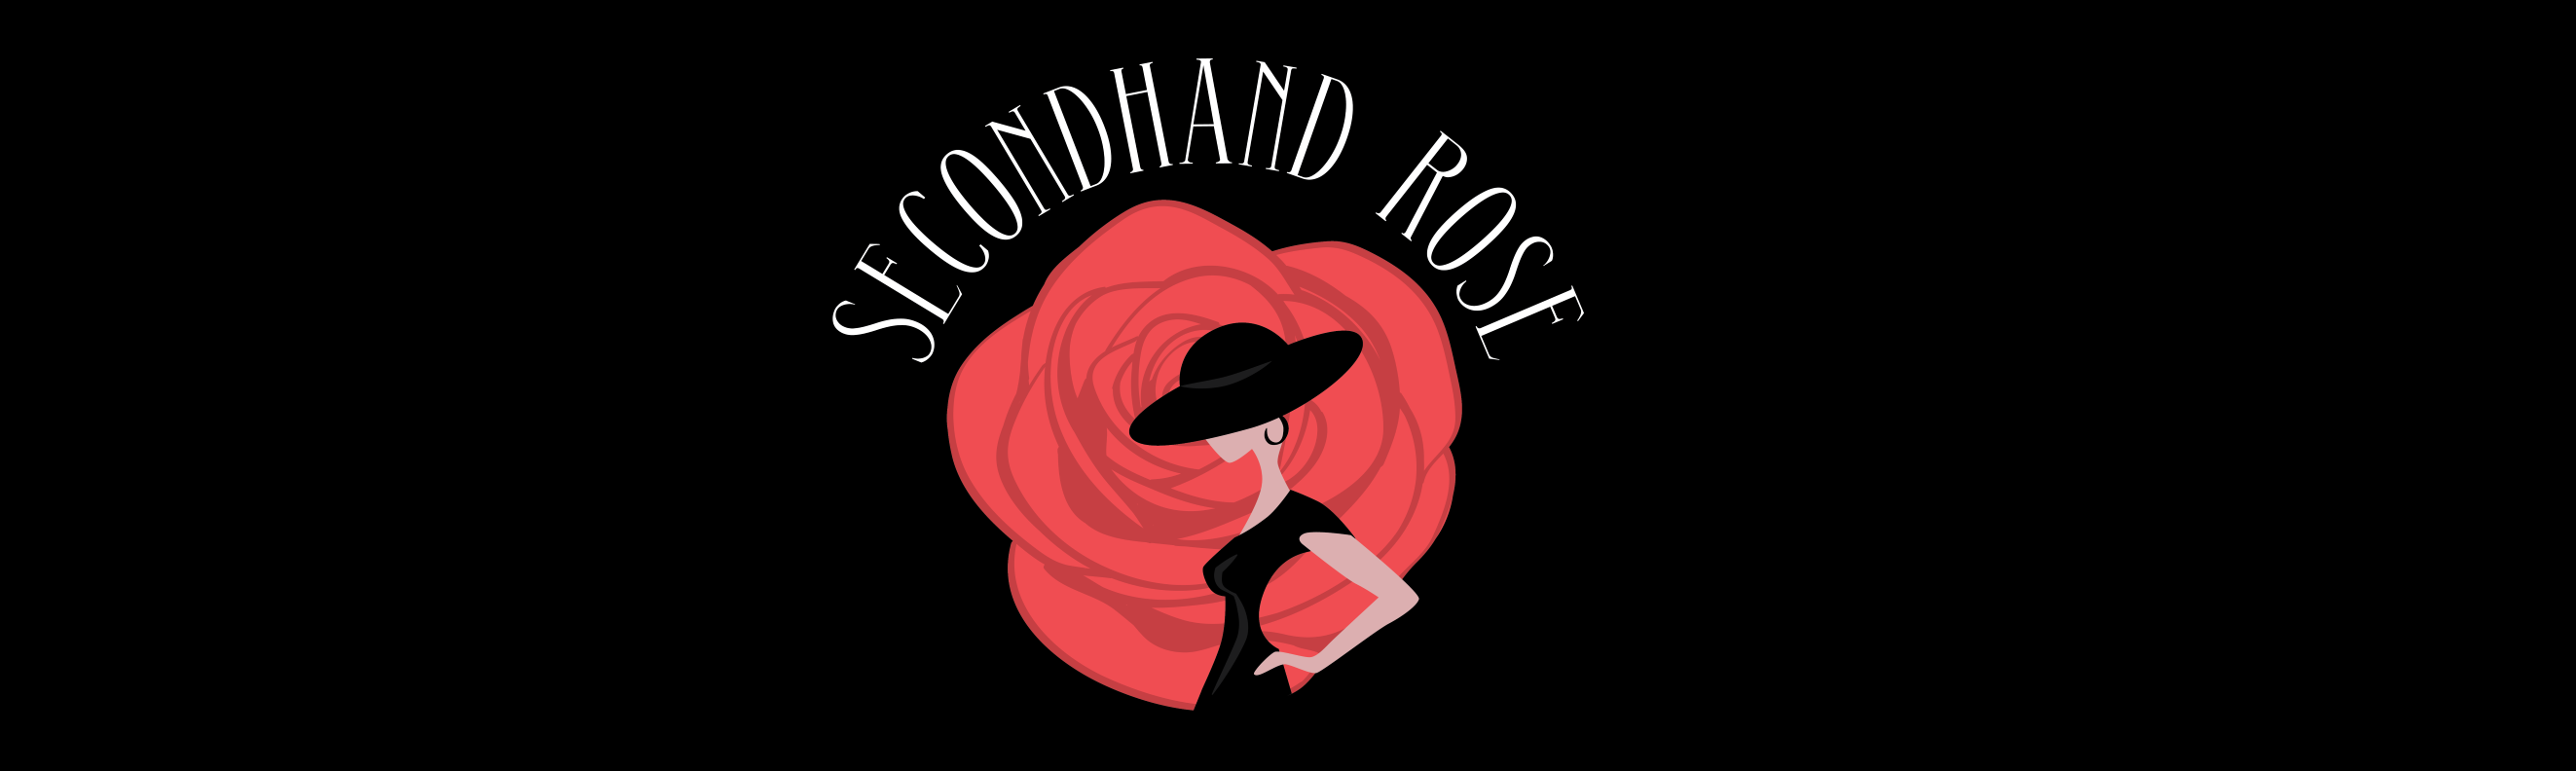 Secondhandrose.nl upgrade Shopify Thema